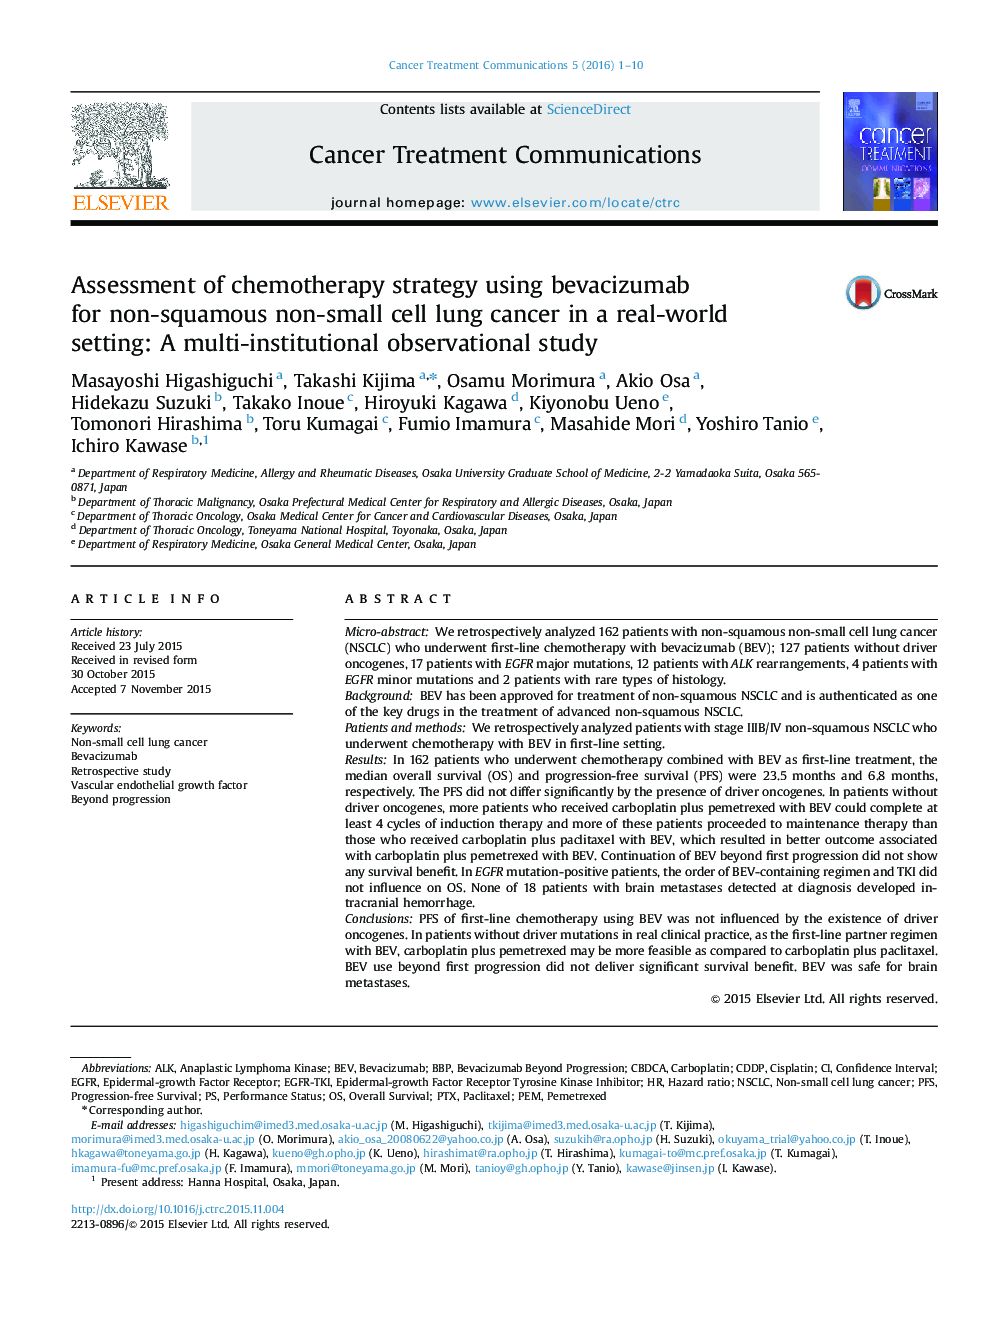 Assessment of chemotherapy strategy using bevacizumab for non-squamous non-small cell lung cancer in a real-world setting: A multi-institutional observational study